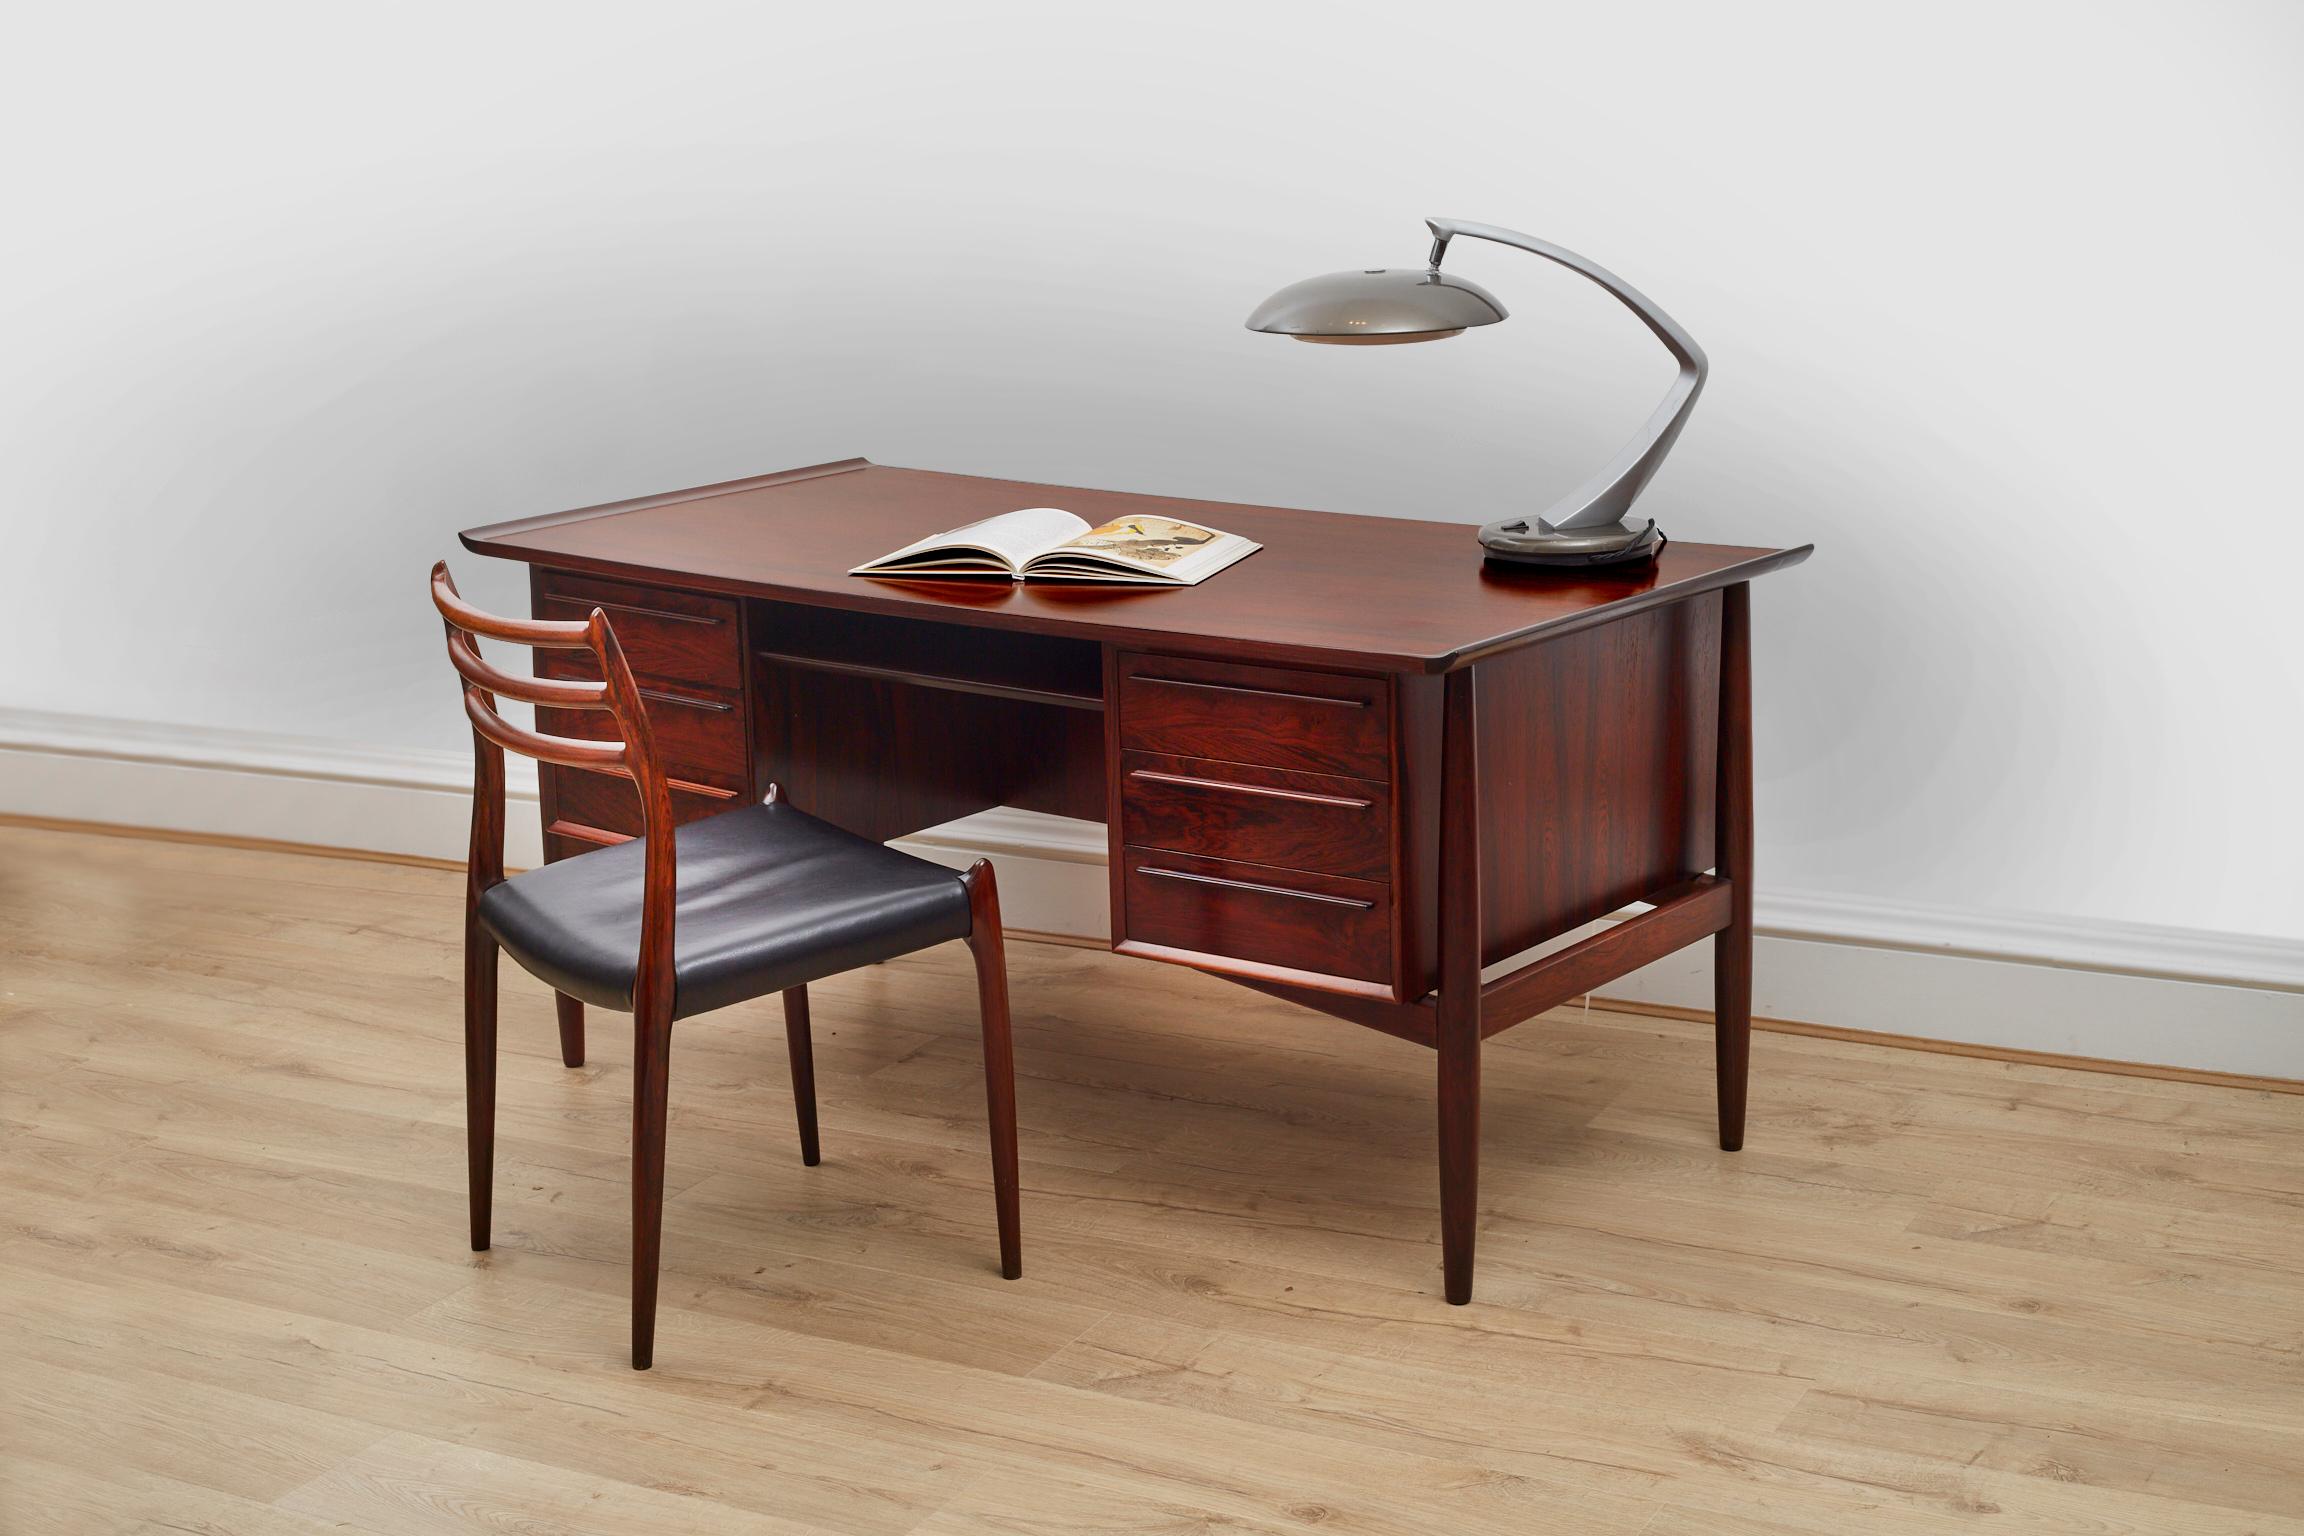 Arne Vodder stylish mid-century executive desk made by Sibast in the 1960's. One of the finest Danish furniture manufacturers.

Crafted from Rosewood, this desk provides an abundance of surface space for all your stylish office essentials. There is